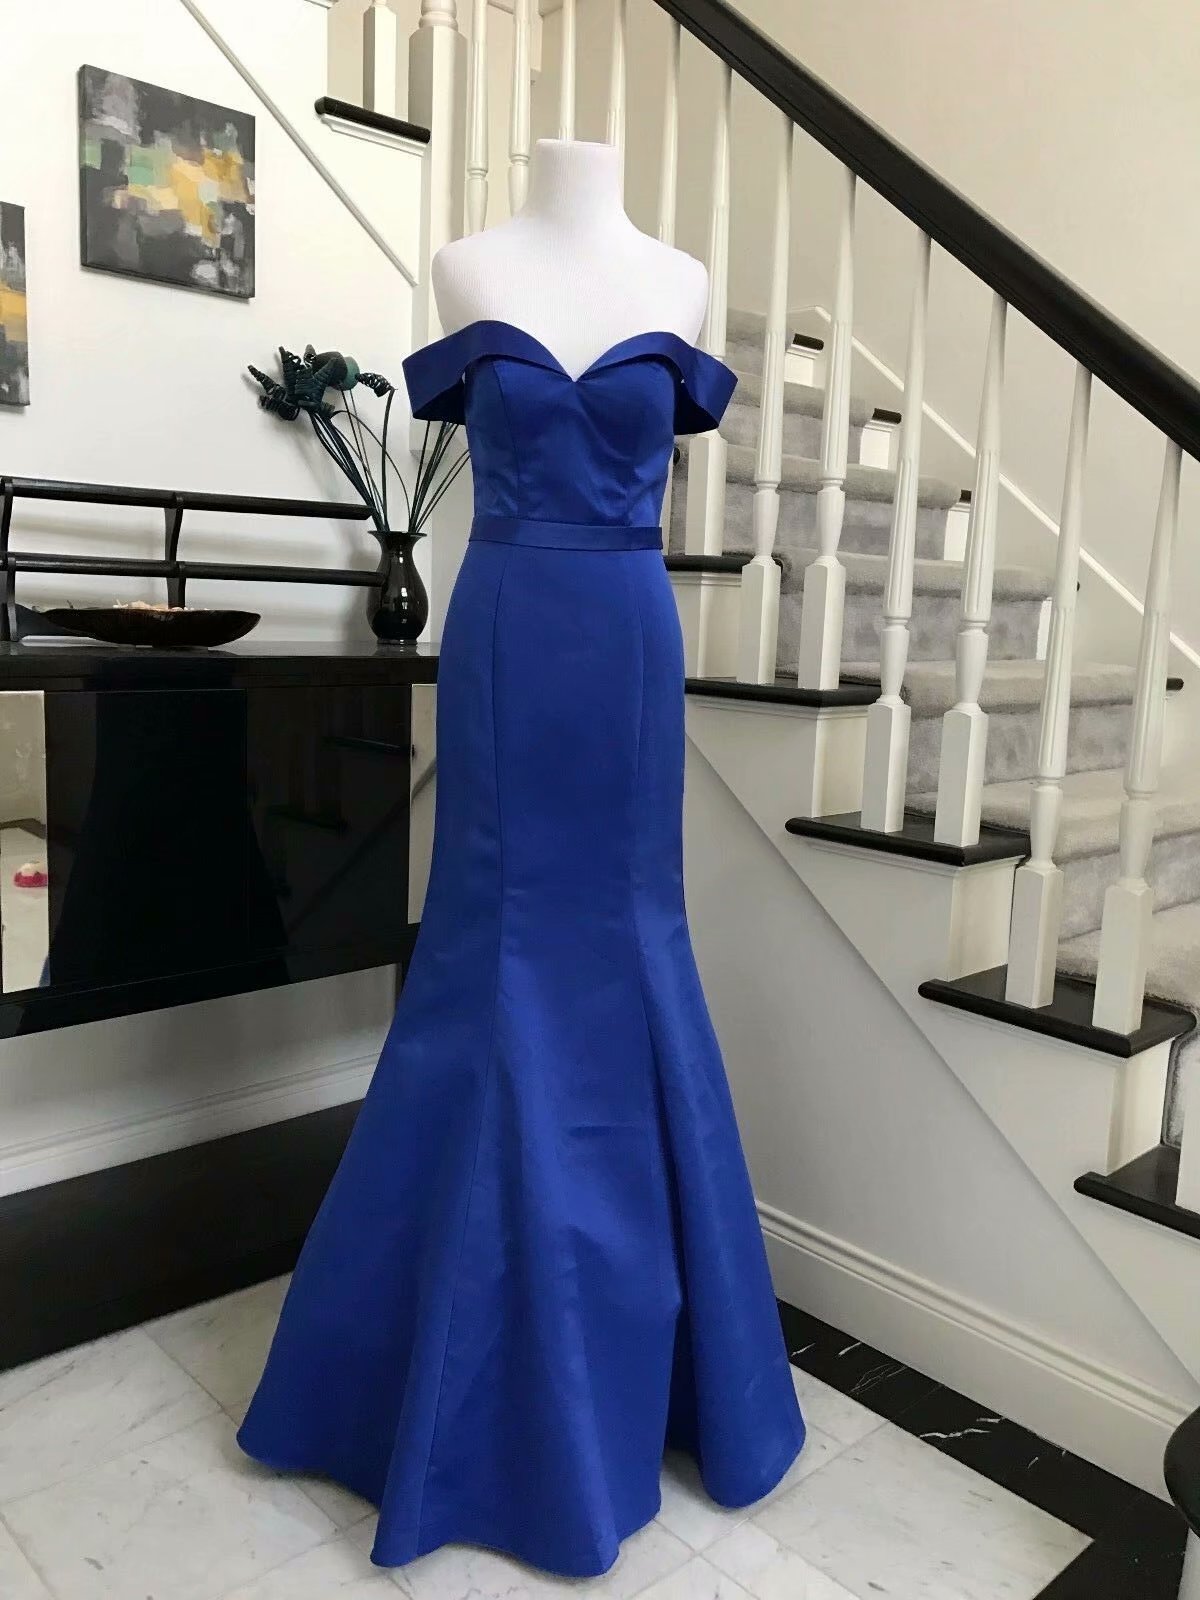 Fashion Mermaid Prom Dresses Satin Floor Length Off The Shoulder Royal Blue Evening Gowns